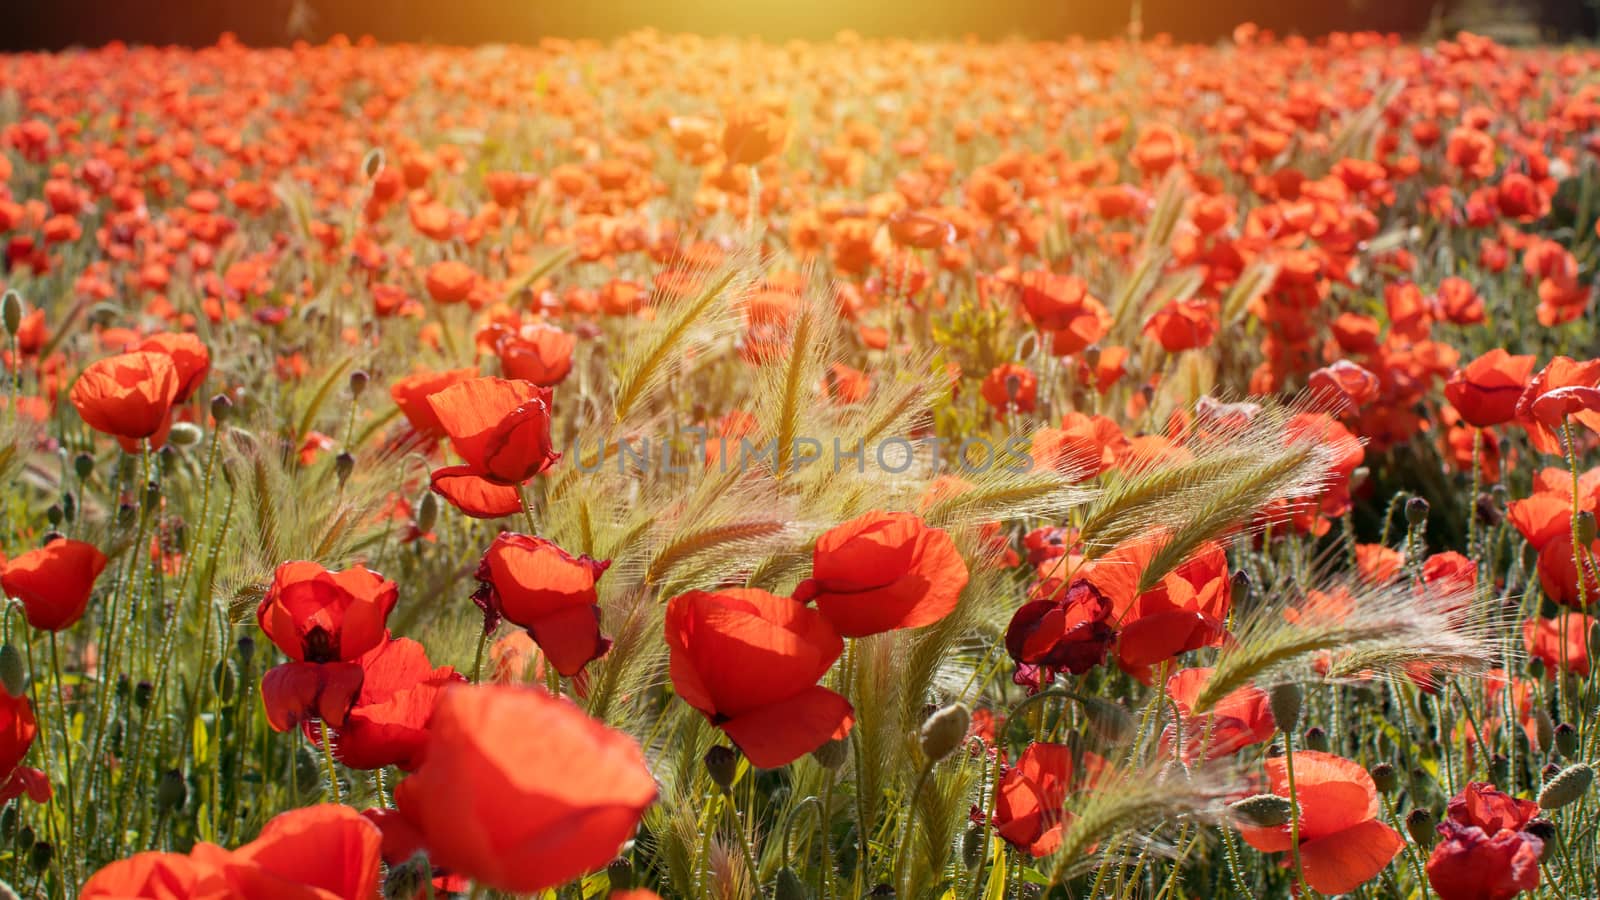 Sunset over field with Red poppies by worledit